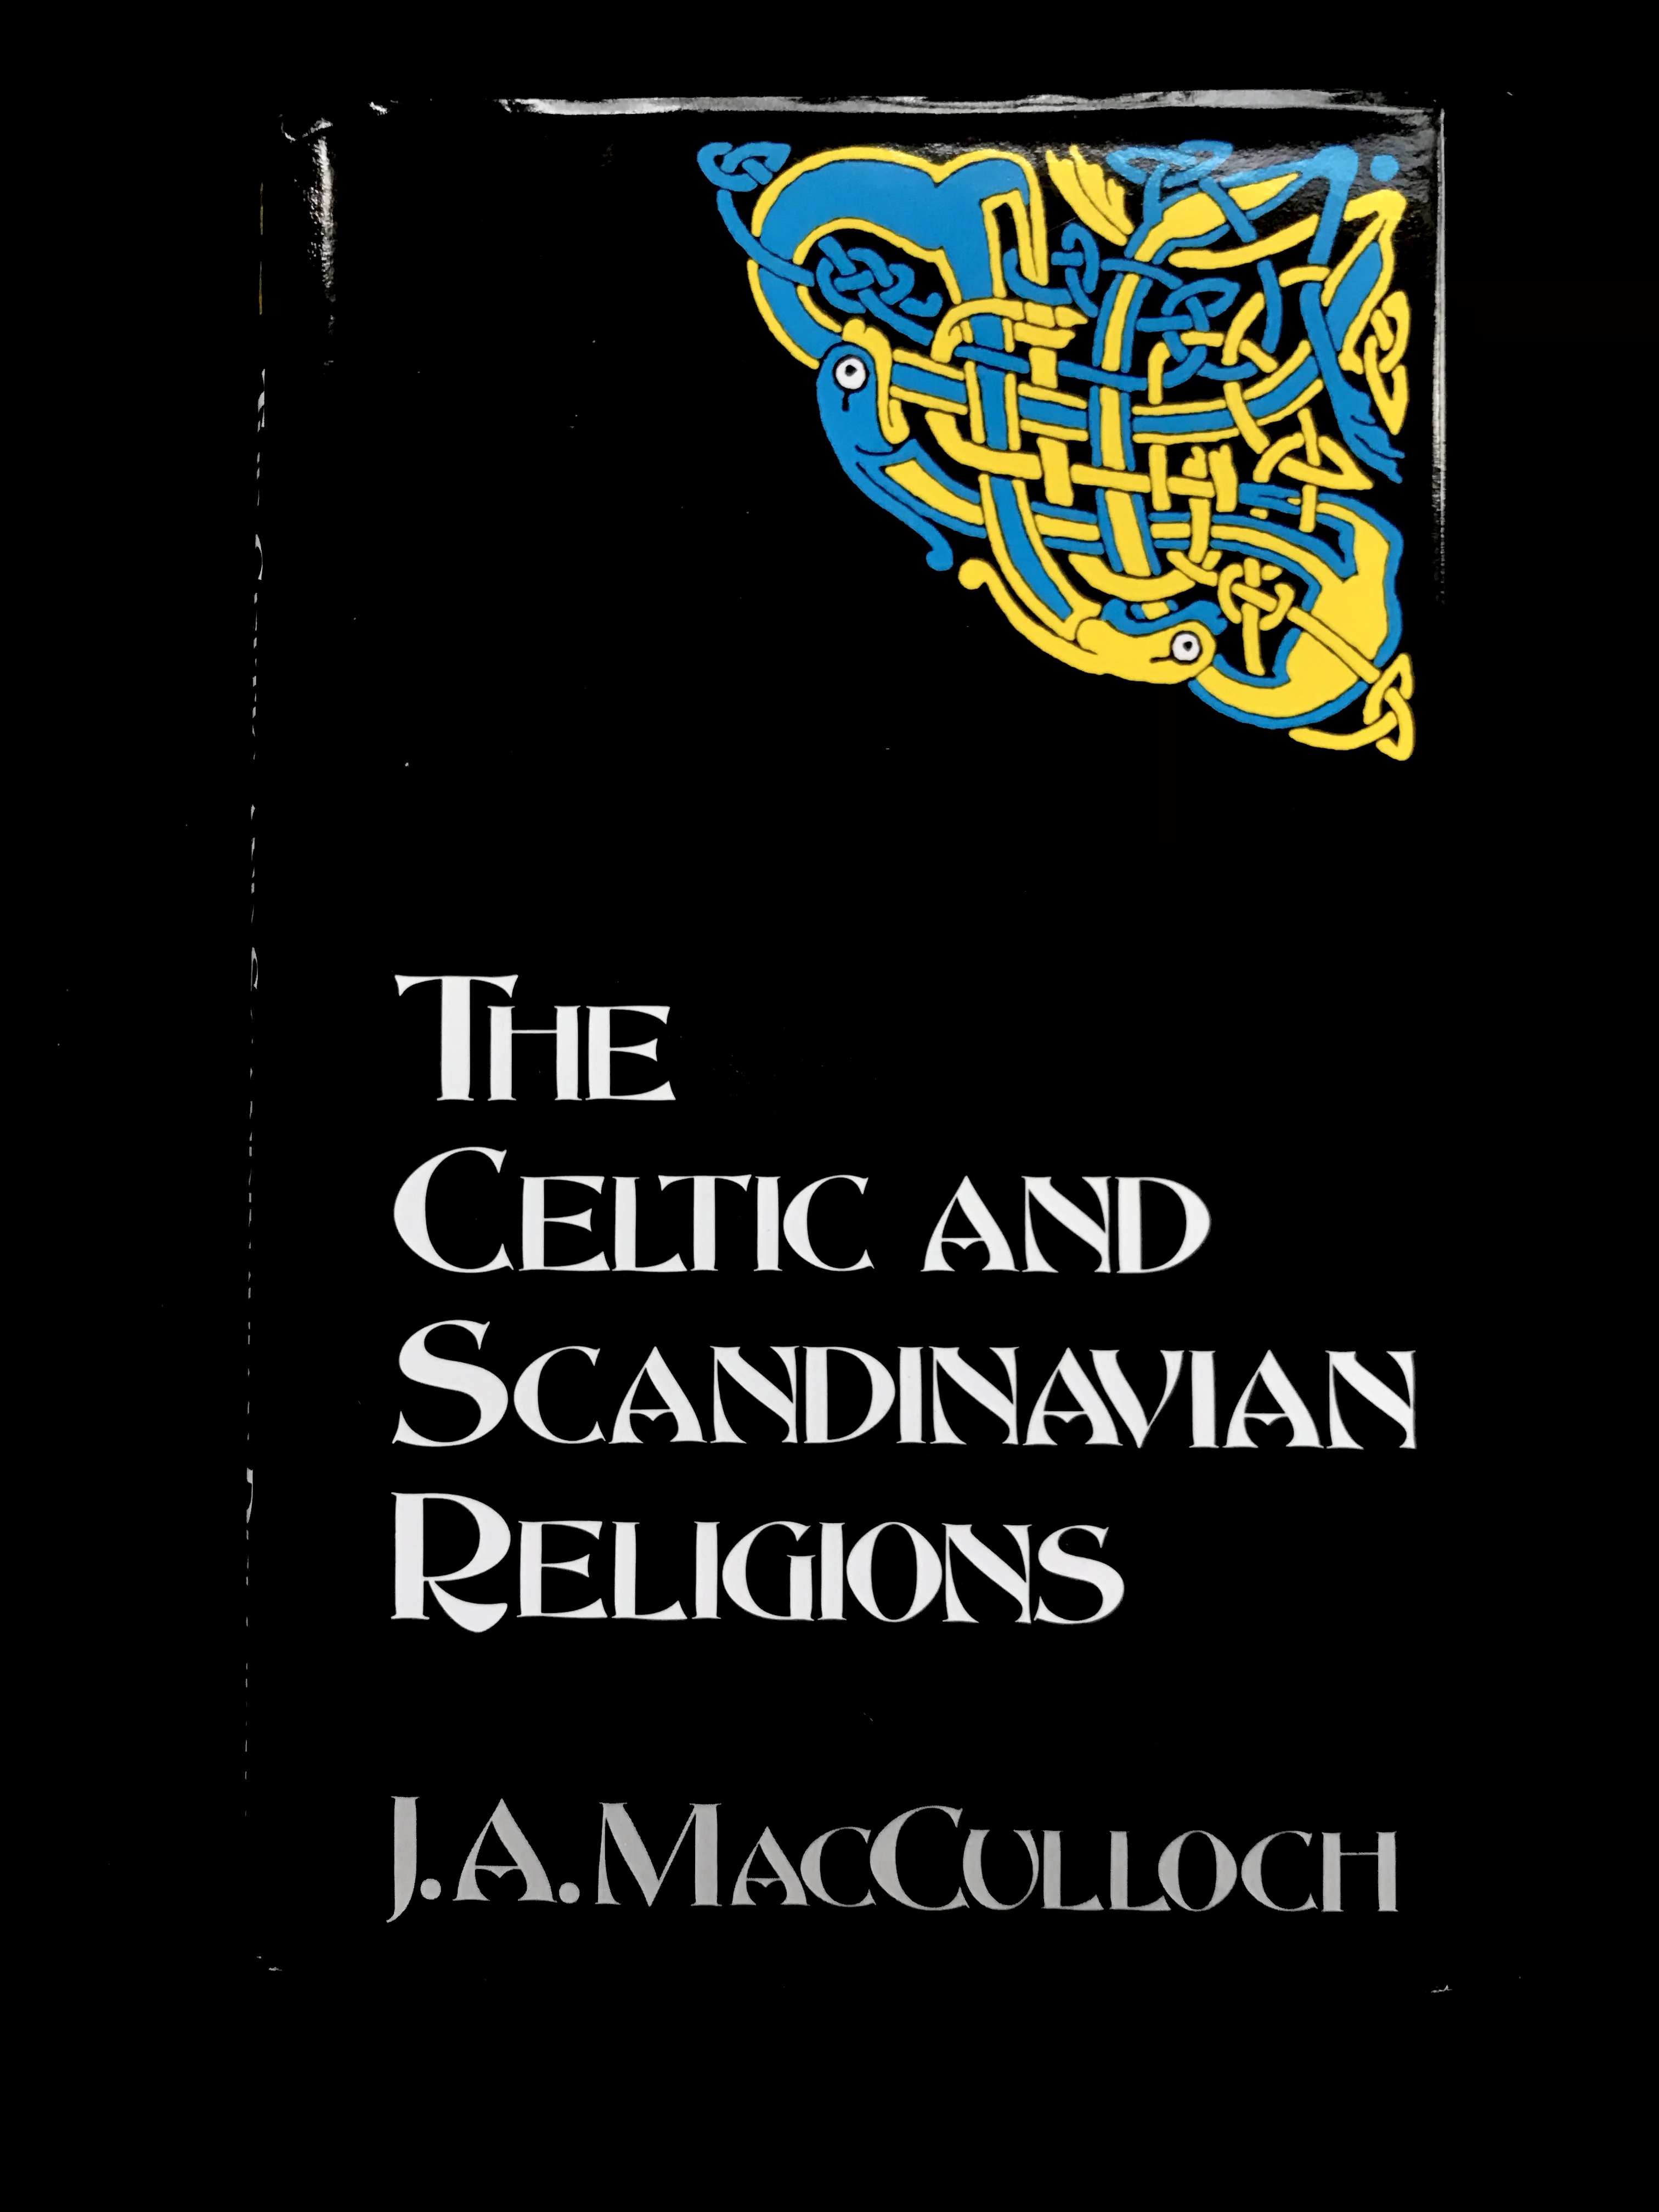 The Celtic & Scandinavian Religions by J. A. MacCulloch